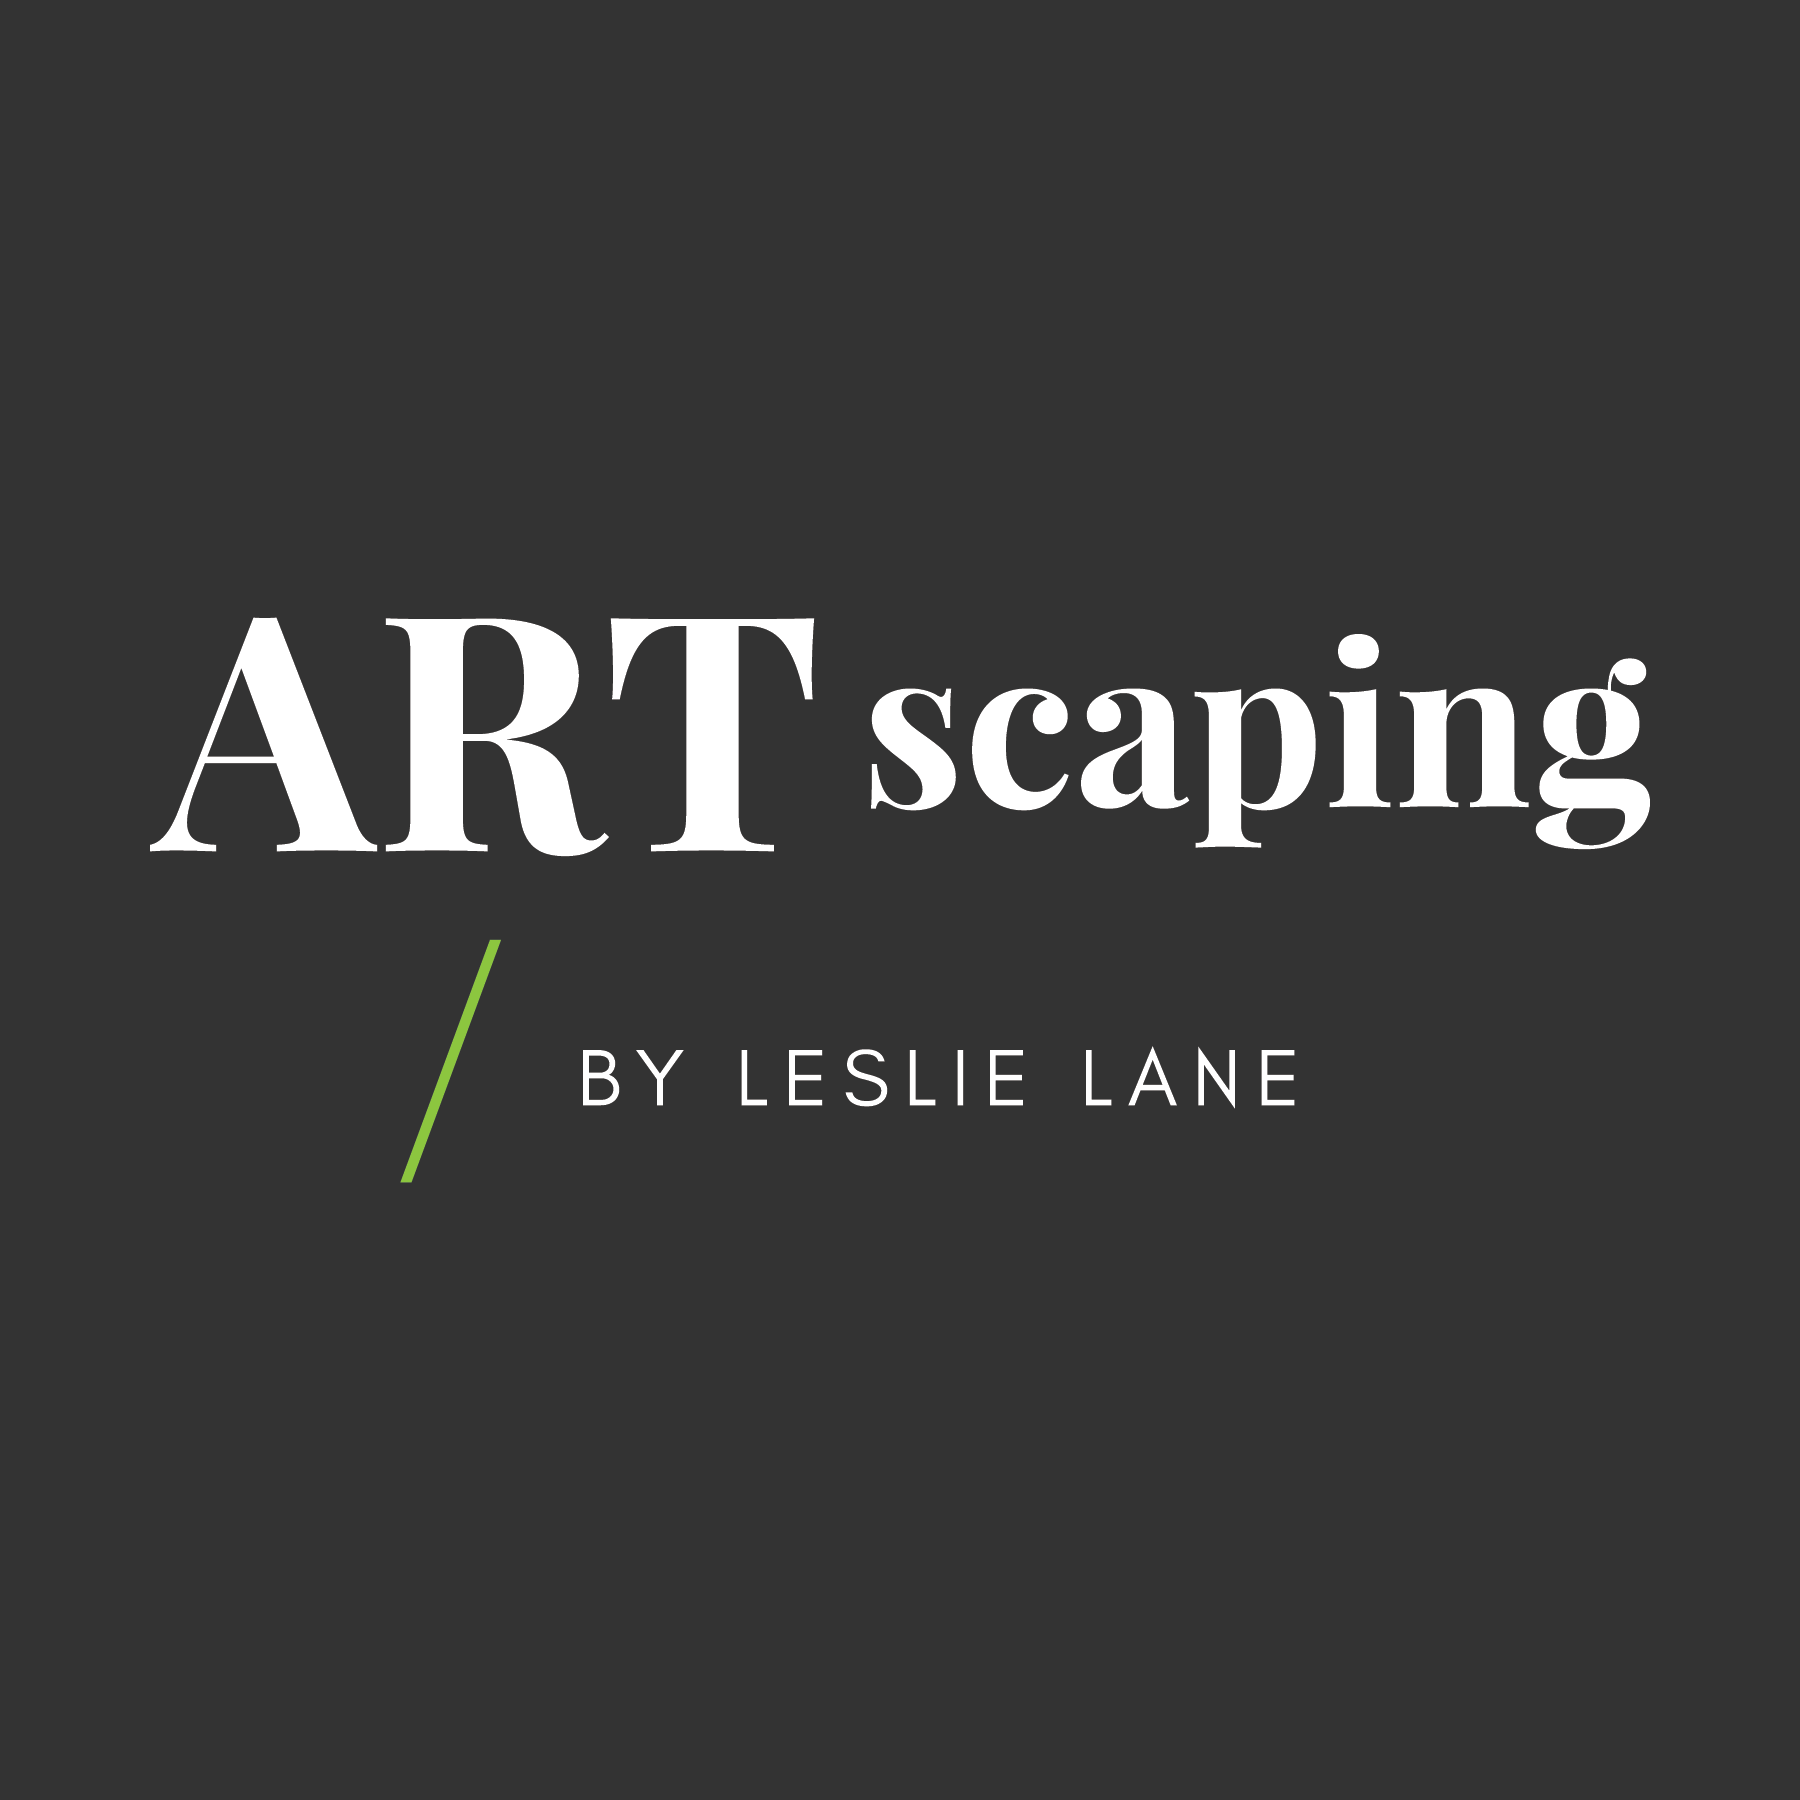 ARTscaping &mdash; Art consulting services for the whole home